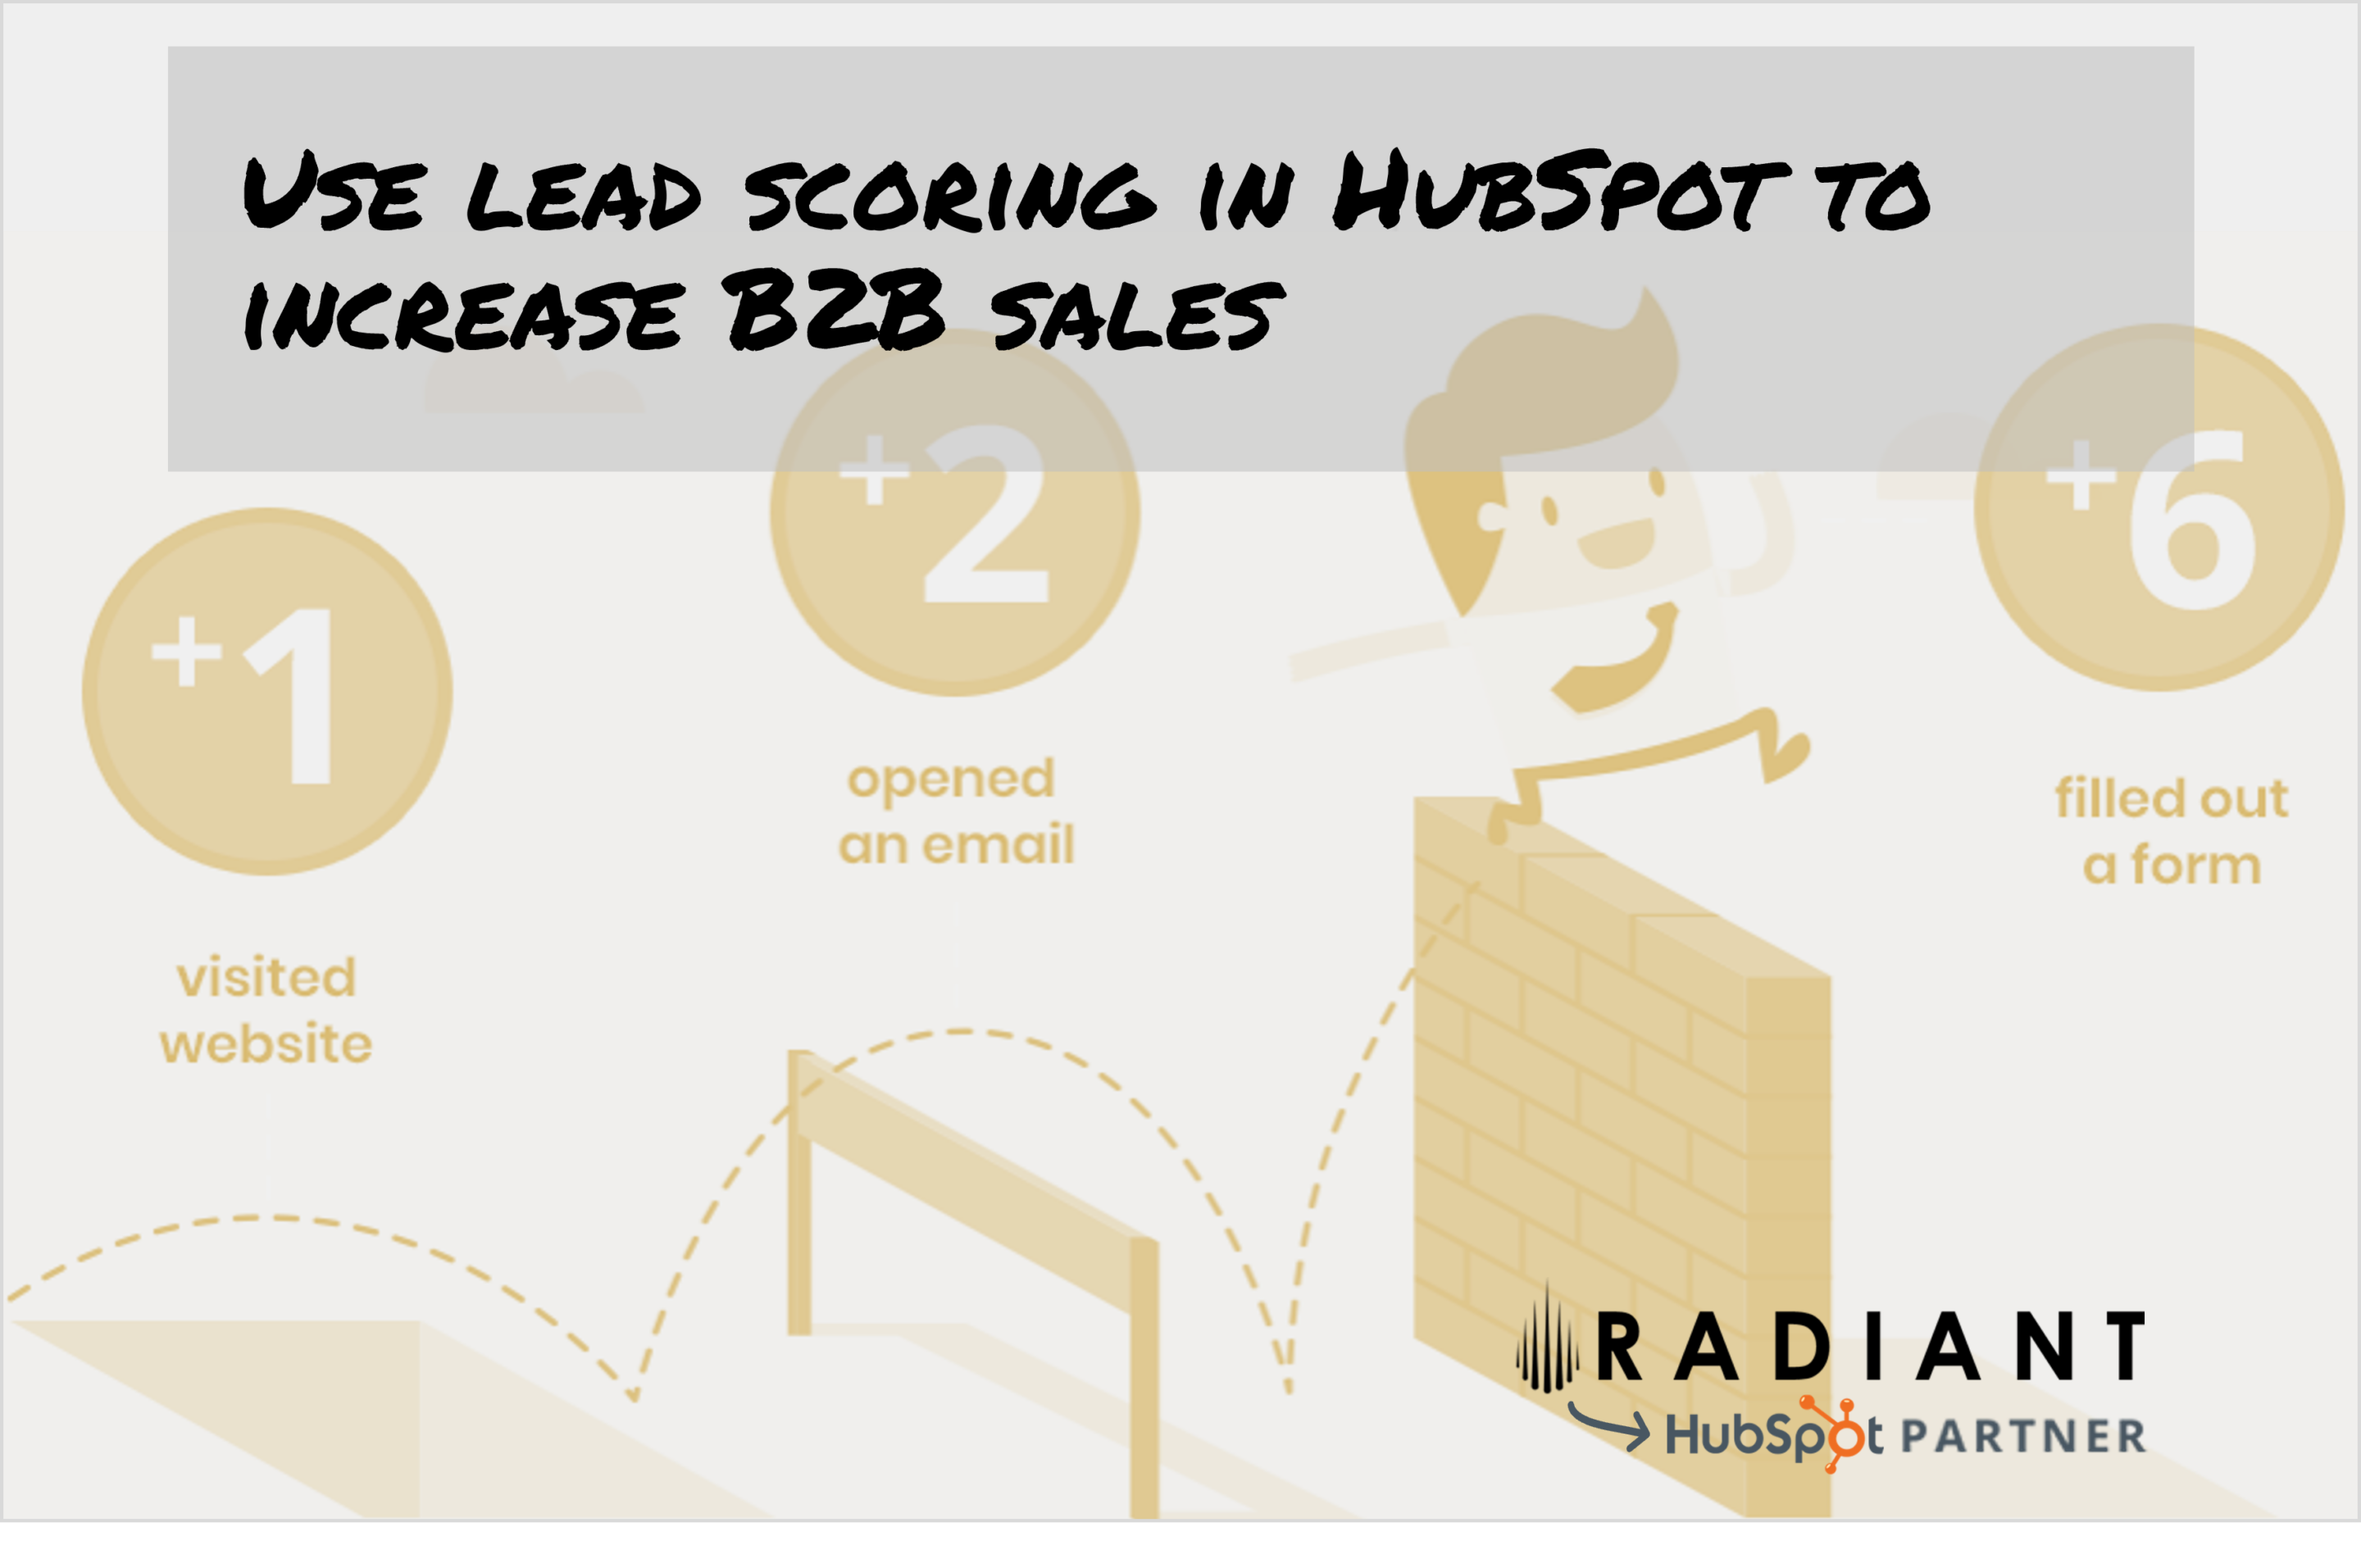 Use lead scoring in HubSpot to increase B2B sales